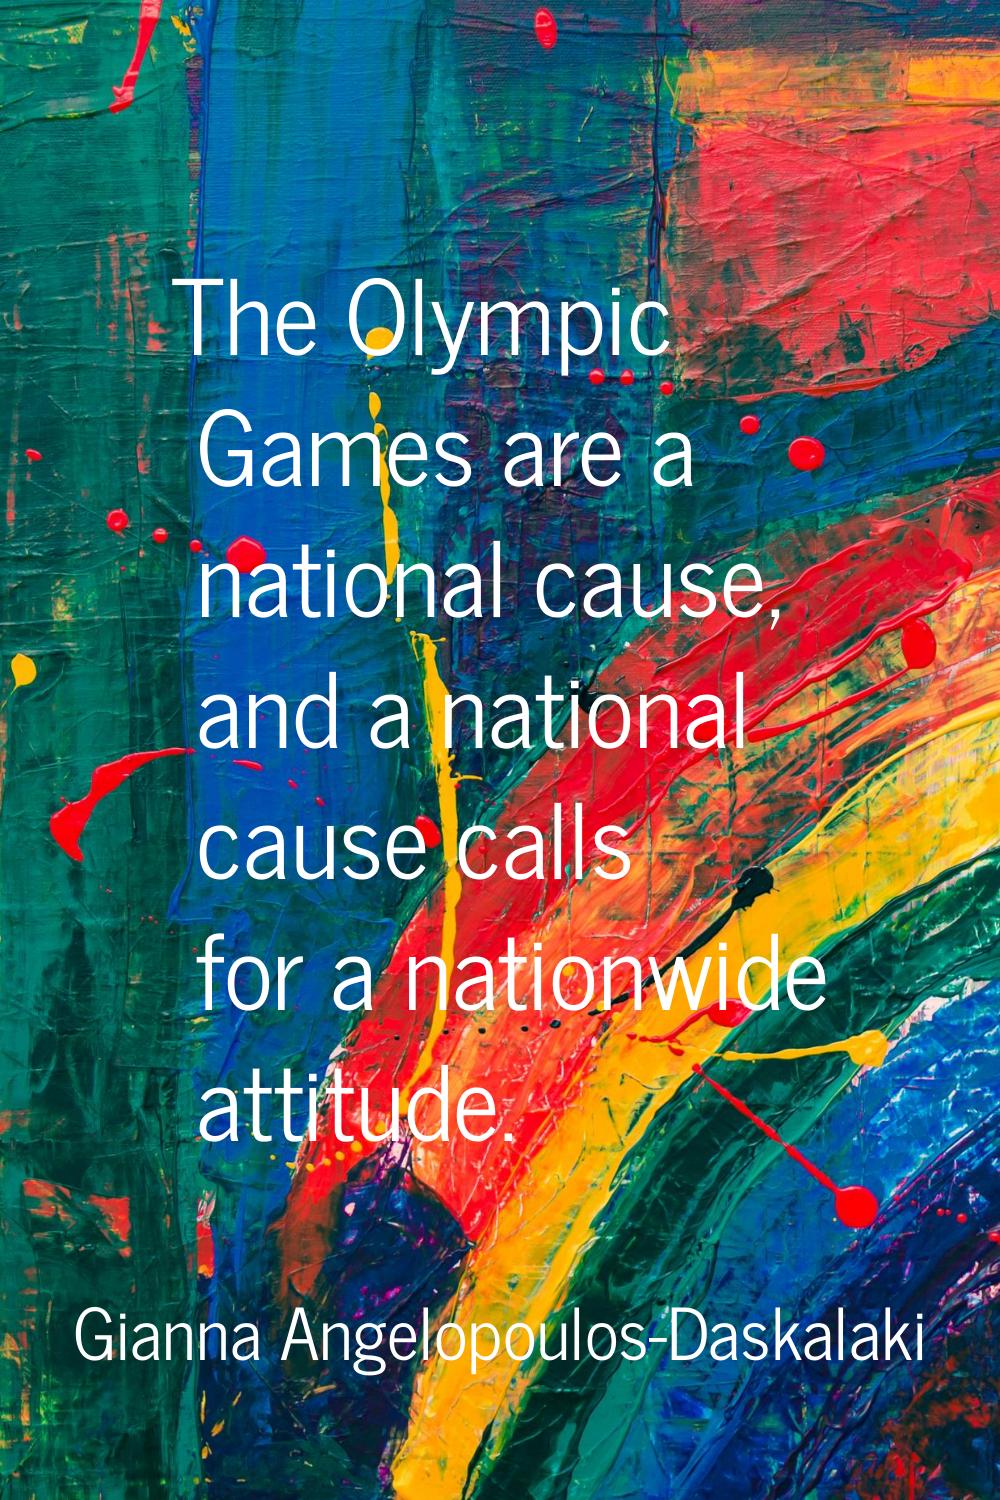 The Olympic Games are a national cause, and a national cause calls for a nationwide attitude.